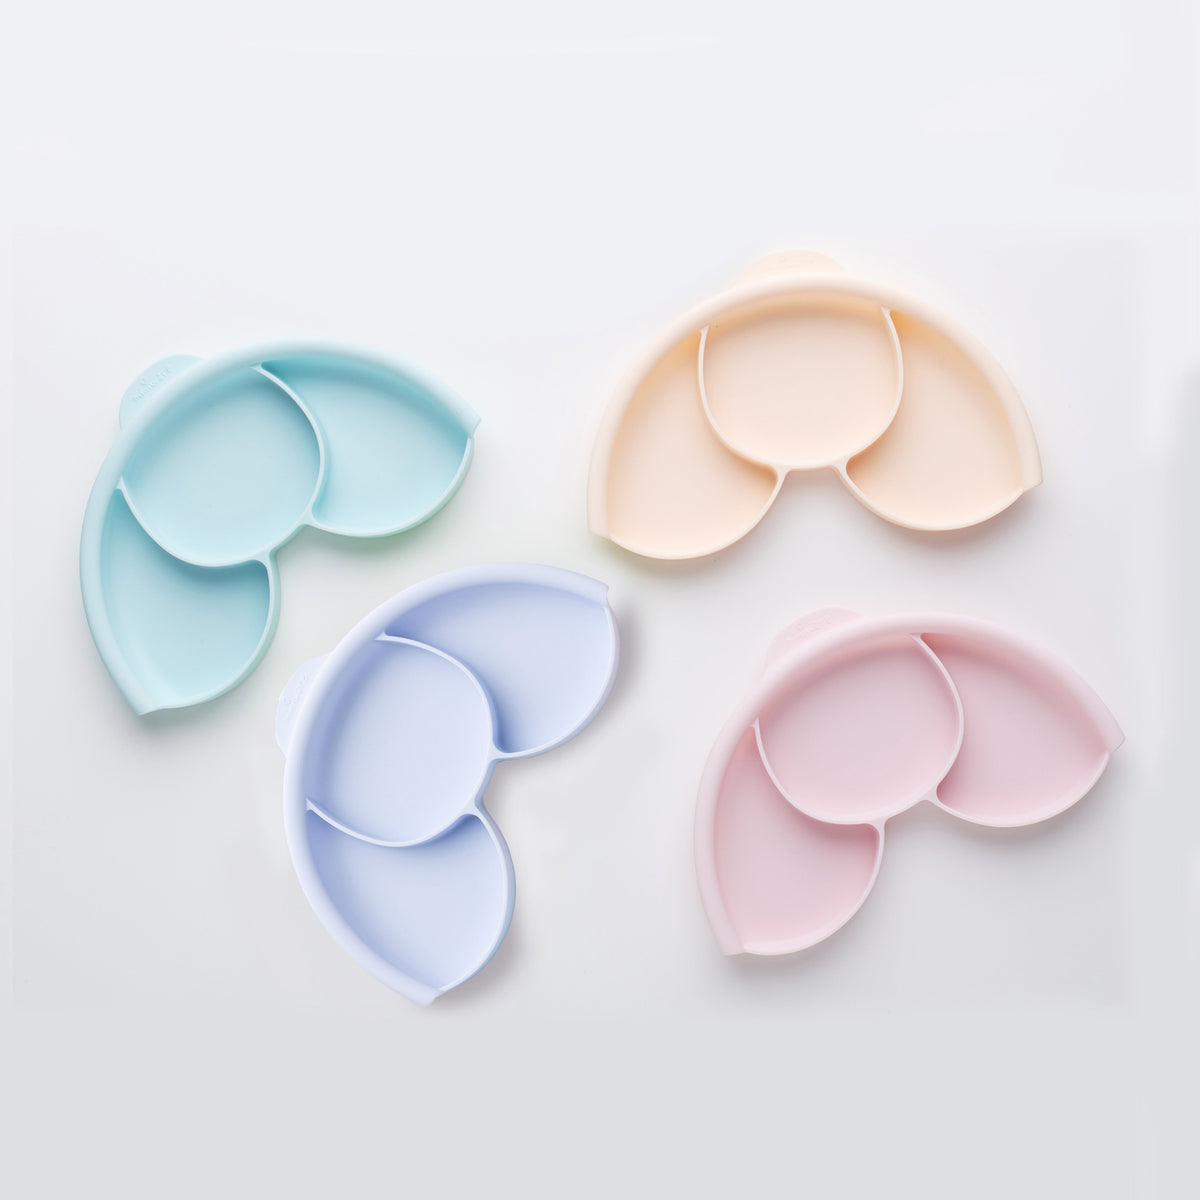 miniware-silicone-smart-divider-in-cotton-candy- (1)